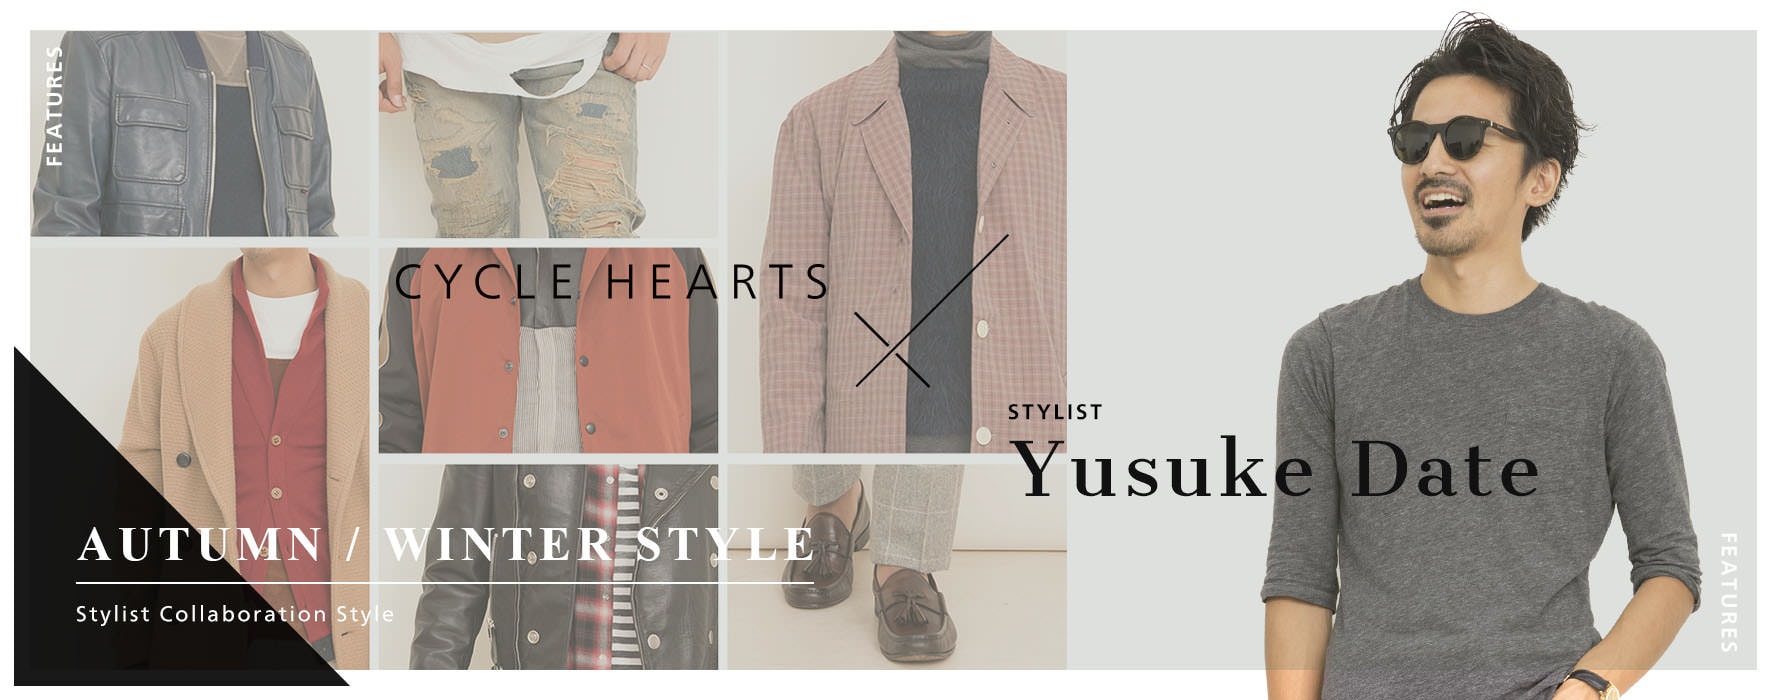 CYCLE HEARTS  Yusuke Date 2017 Autumn/Winter STYLE